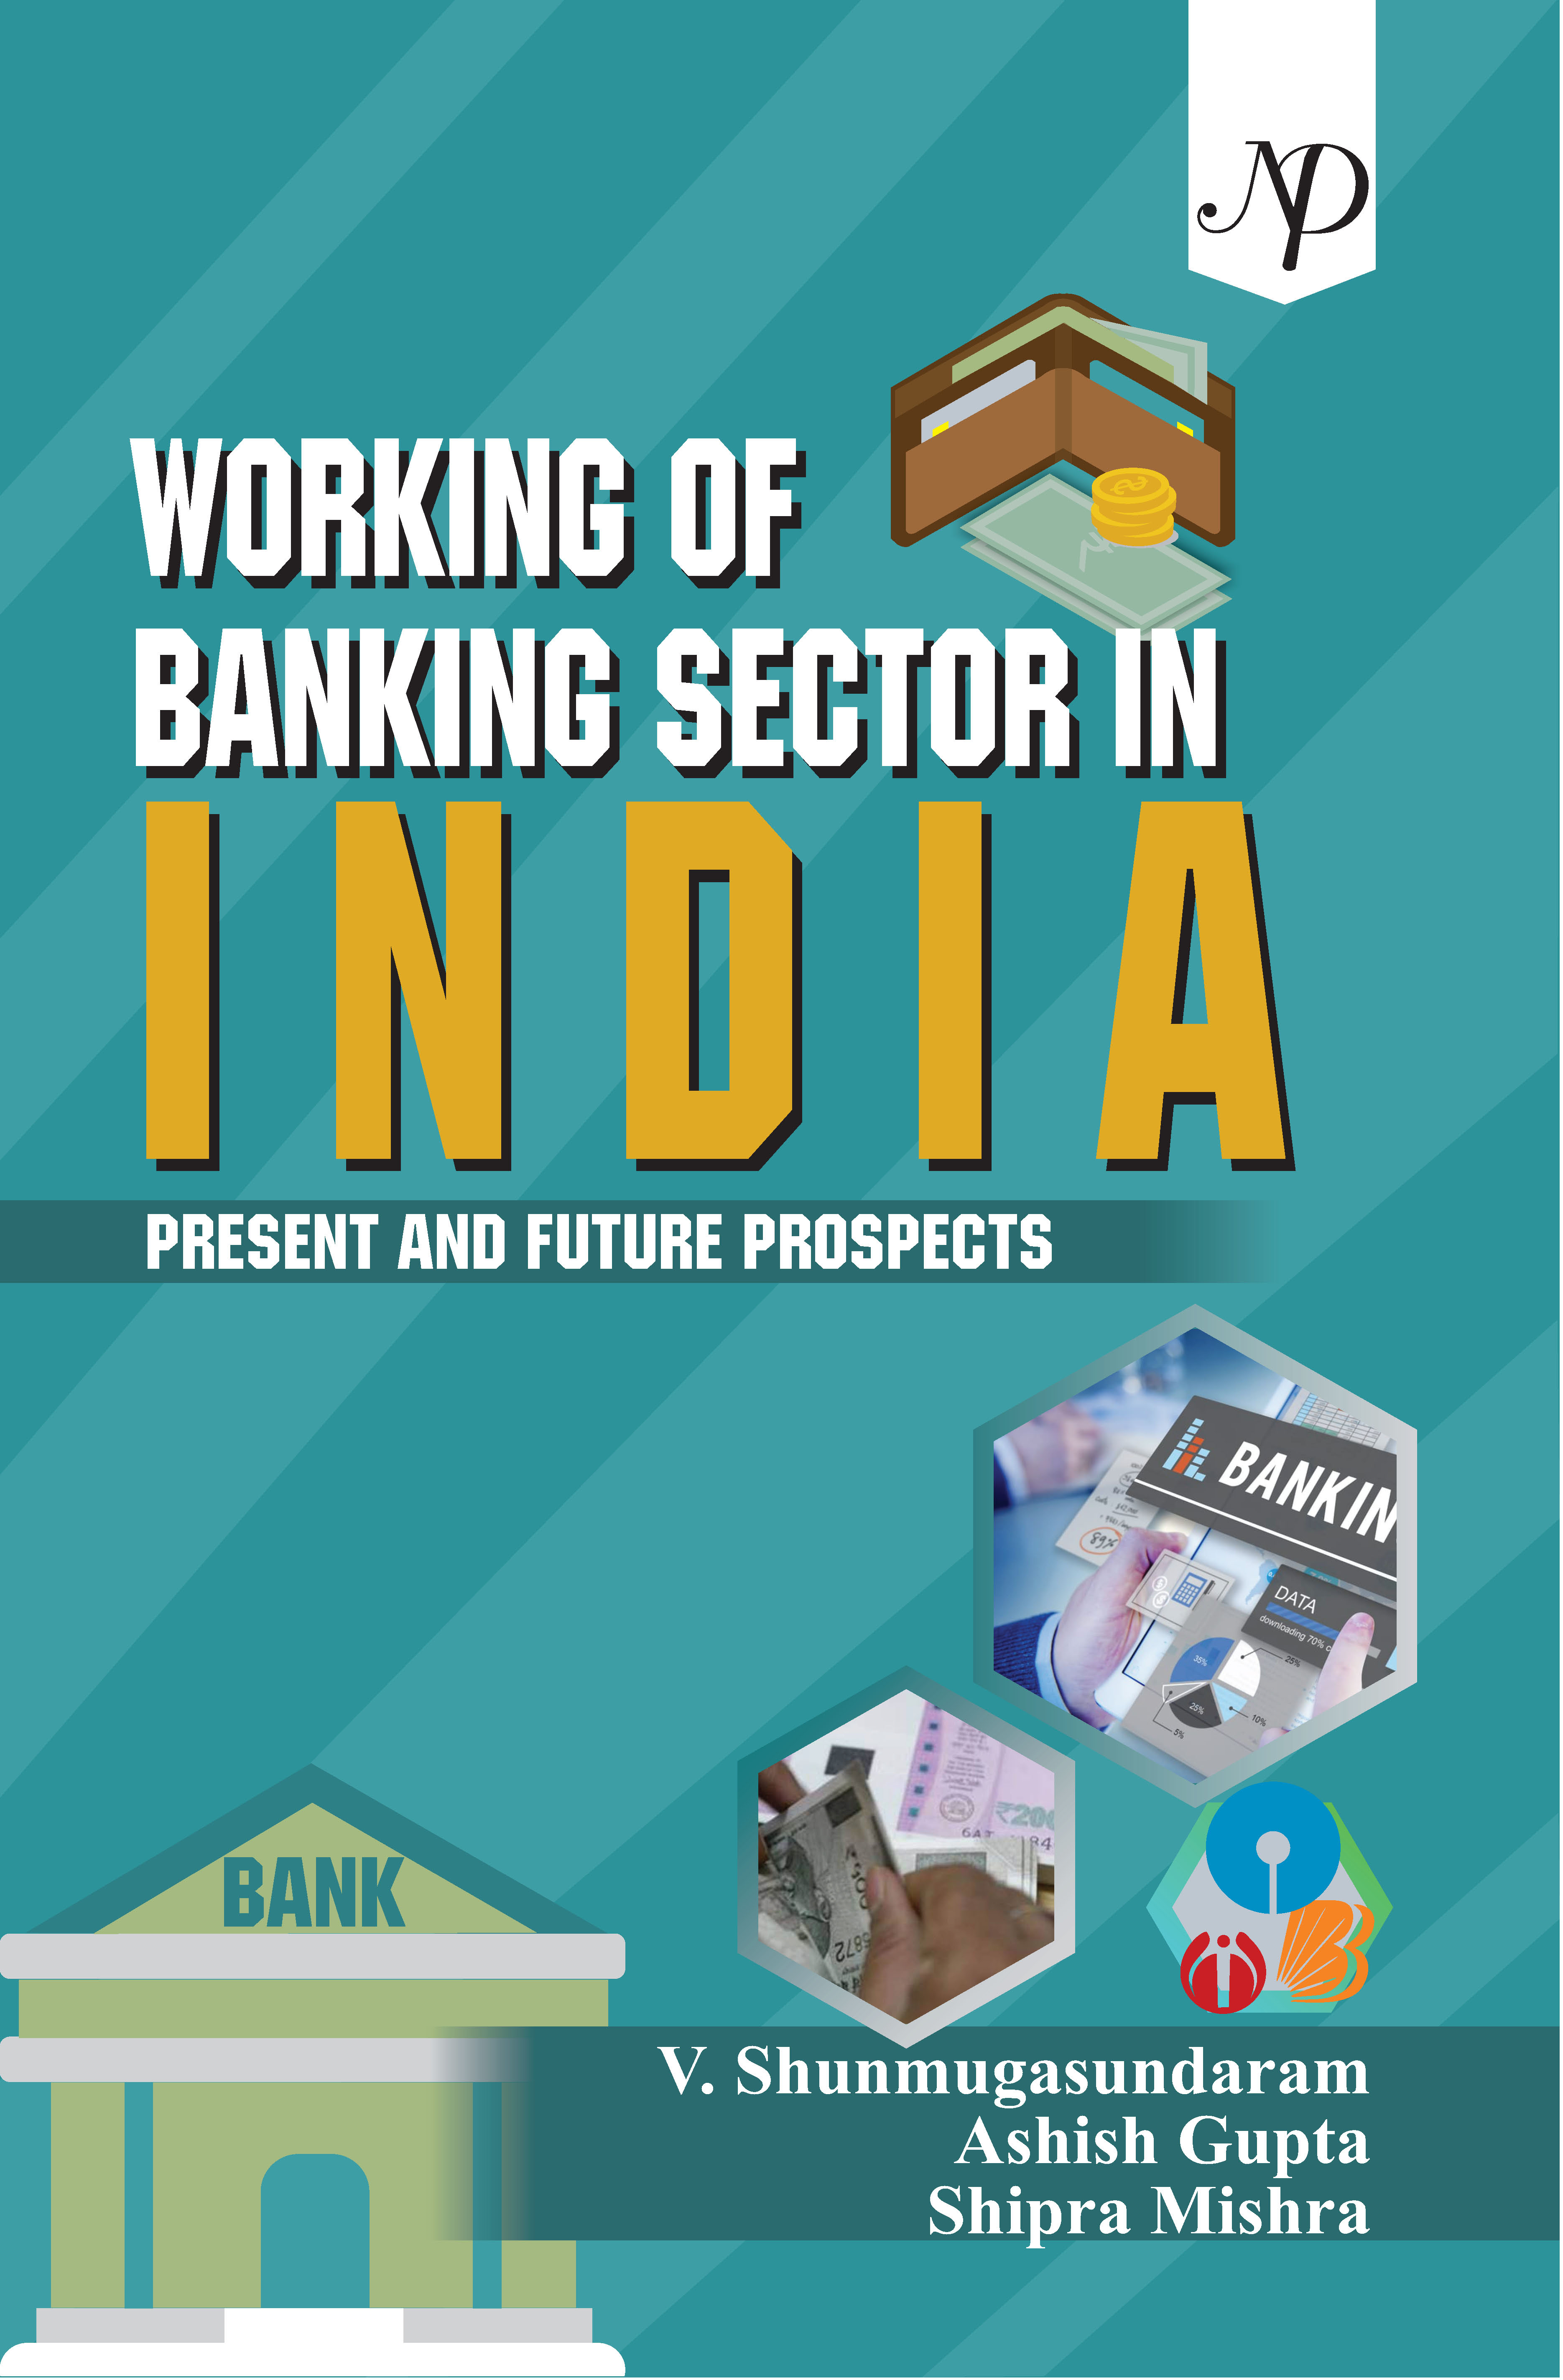 Working of Banking Sector in India Preset and Future Prospects Cover.jpg